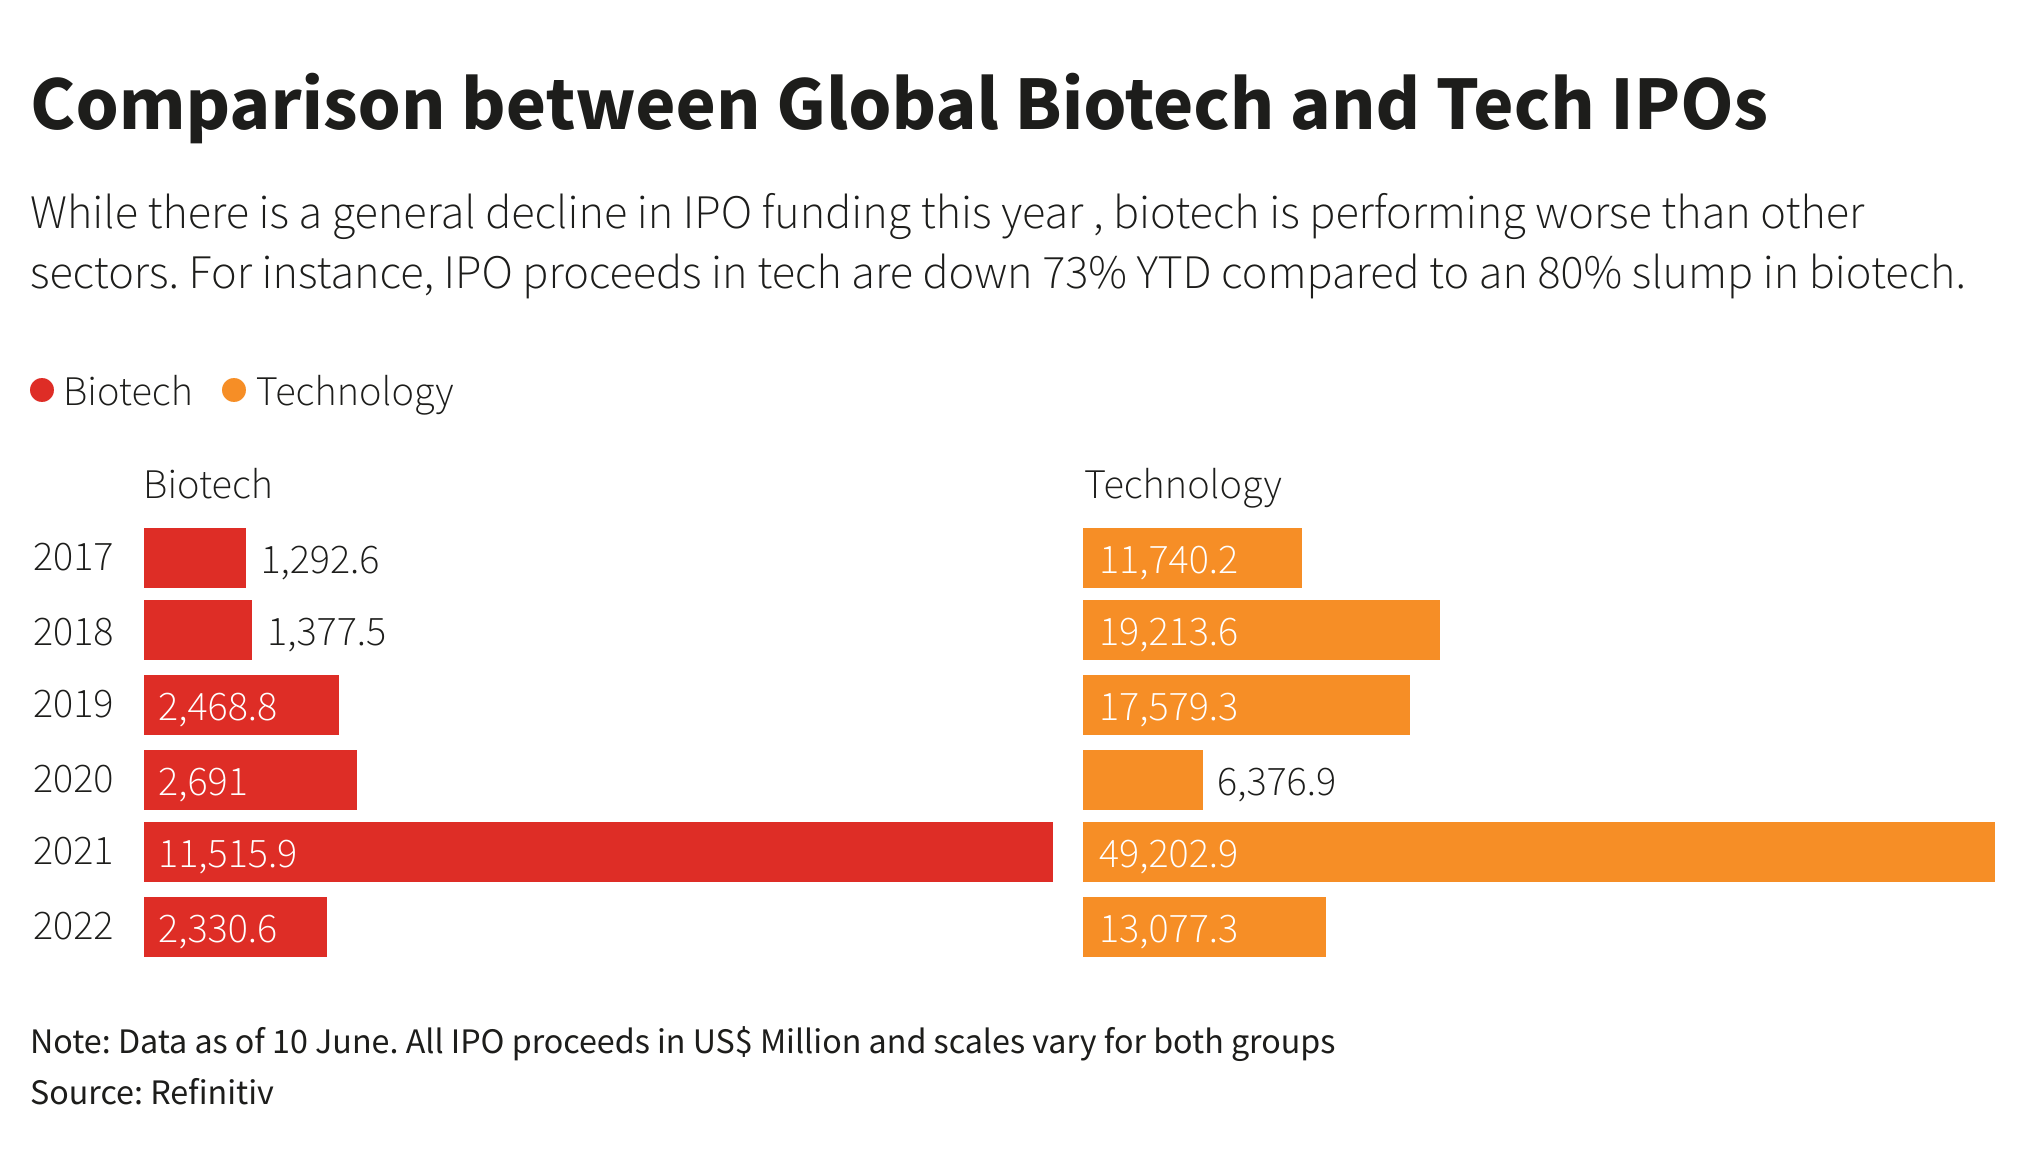 Global Biotech and Tech IPOs Comparison